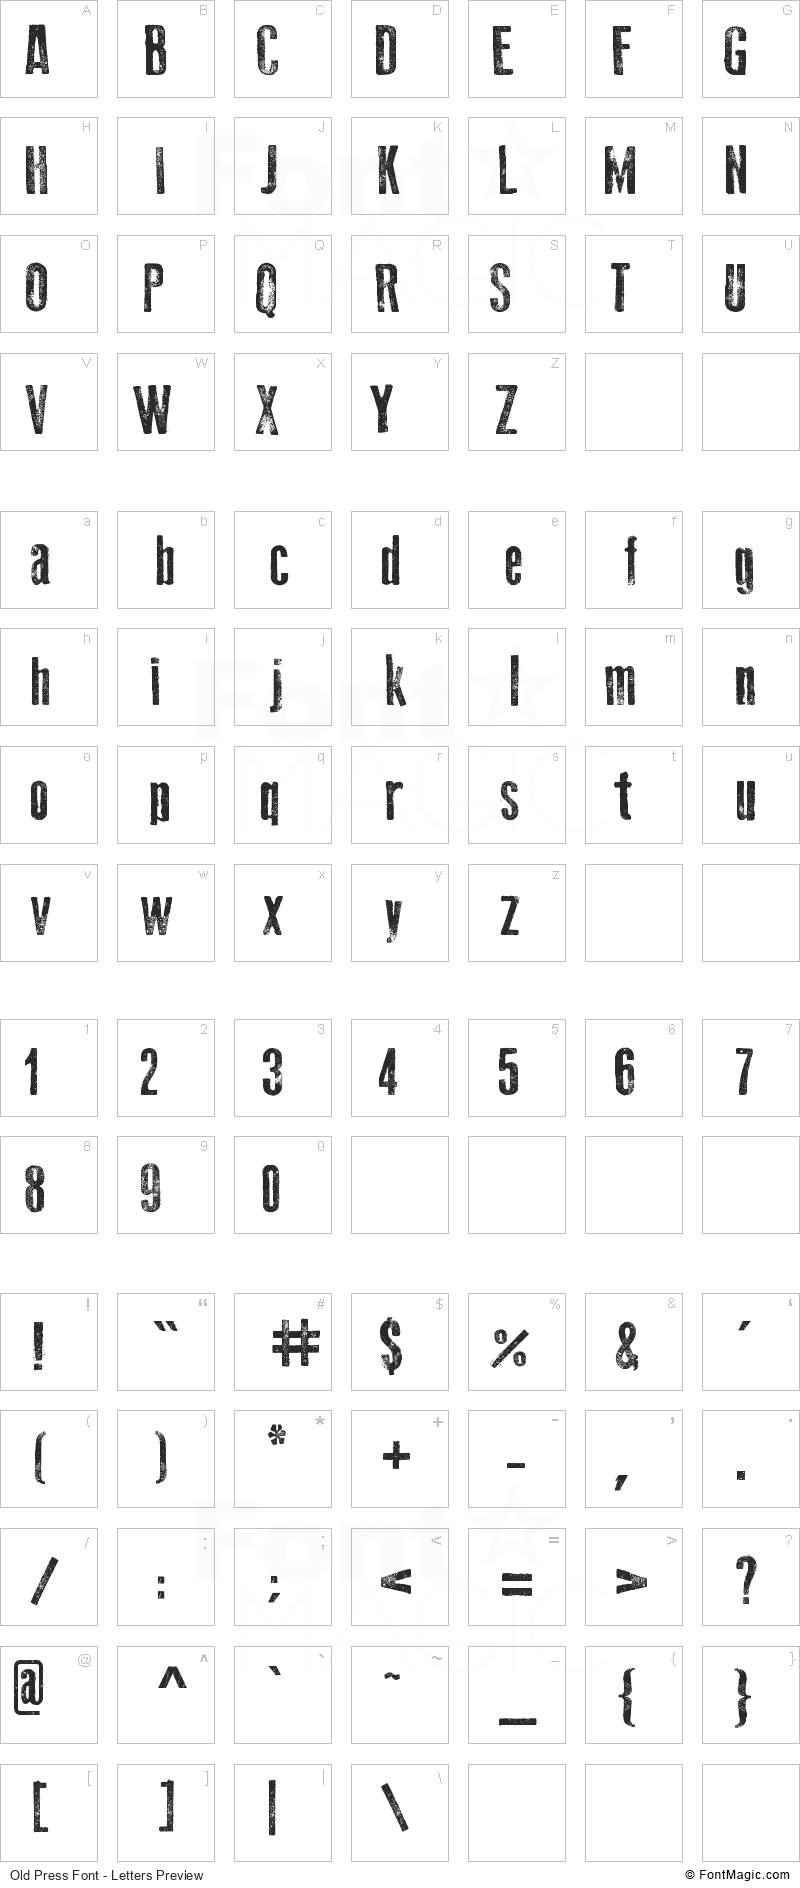 Old Press Font - All Latters Preview Chart